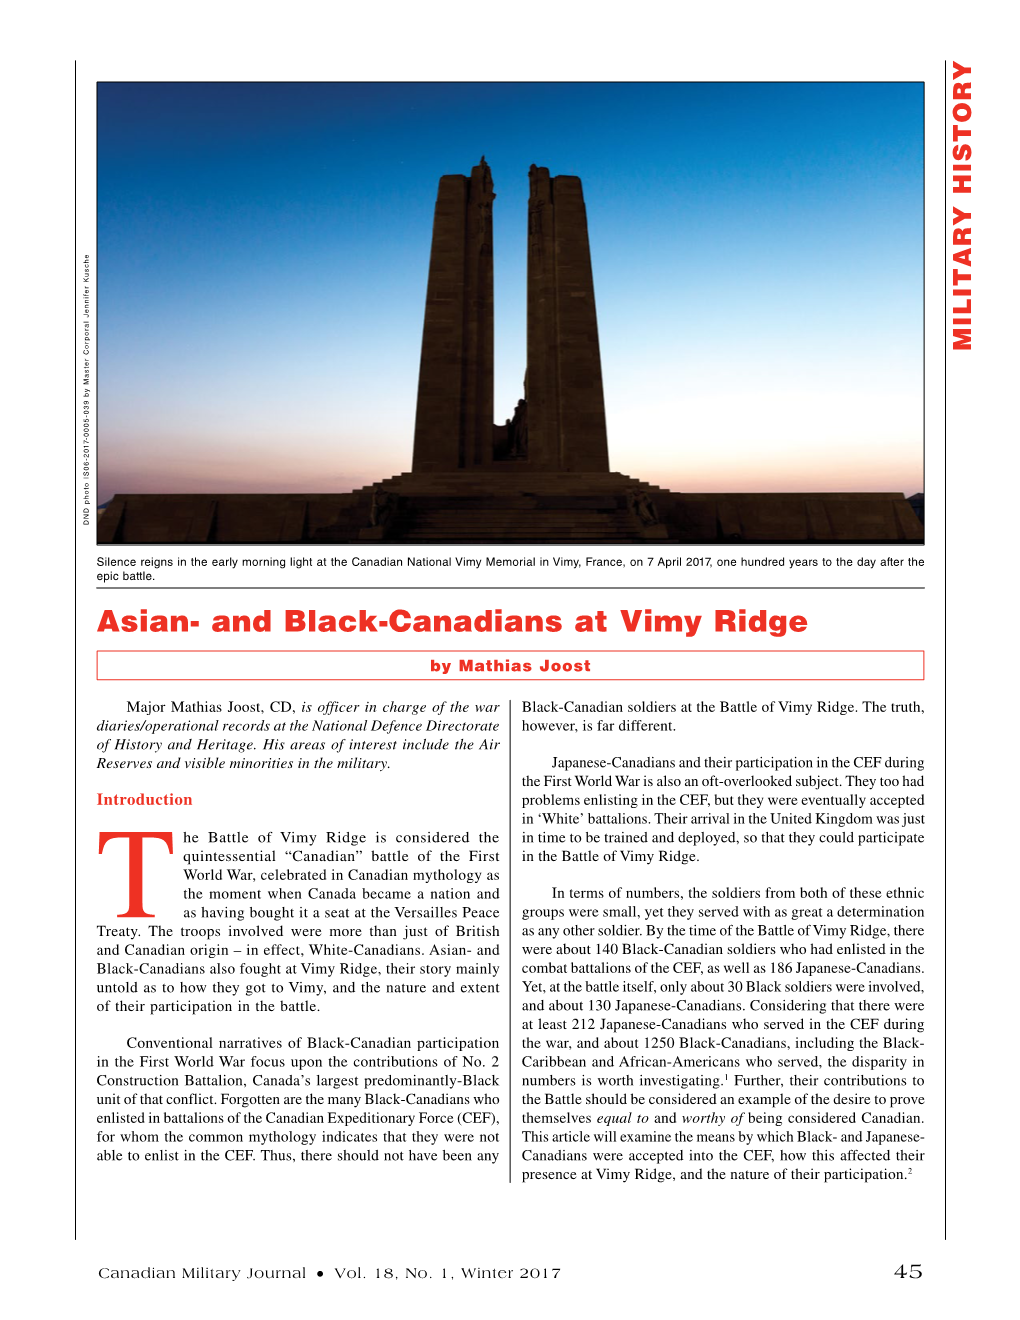 Asian- and Black-Canadians at Vimy Ridge